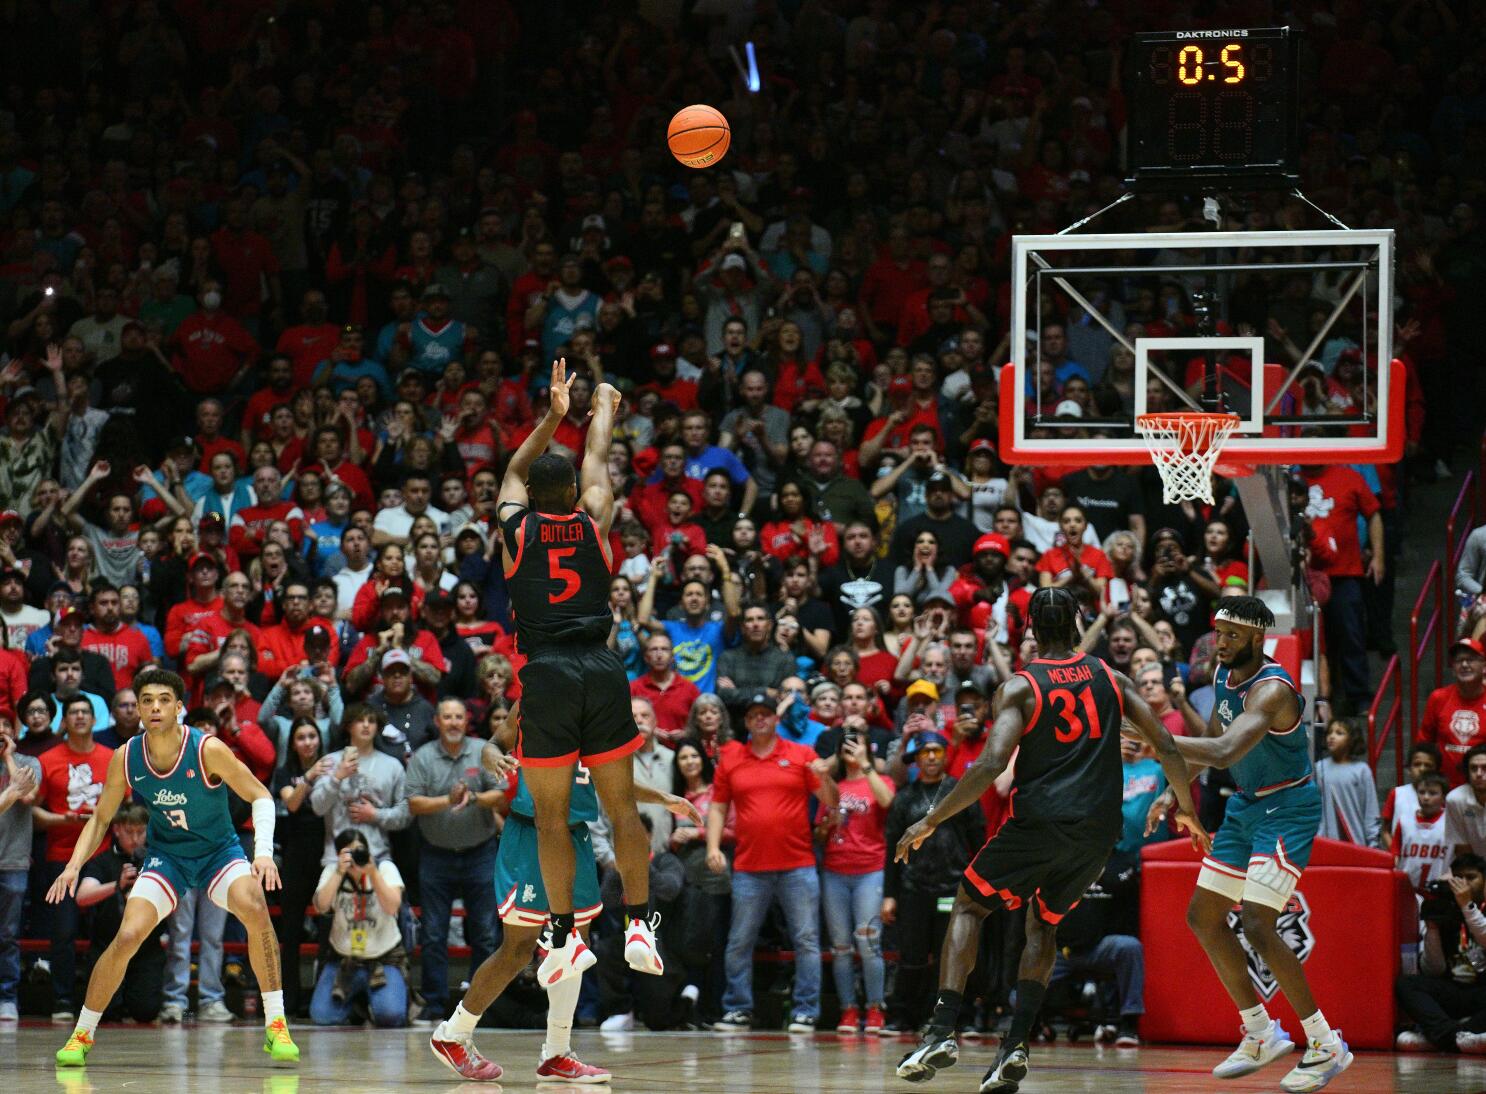 SDSU's buzzer beater is the first to win a Final Four game - Sports  Illustrated